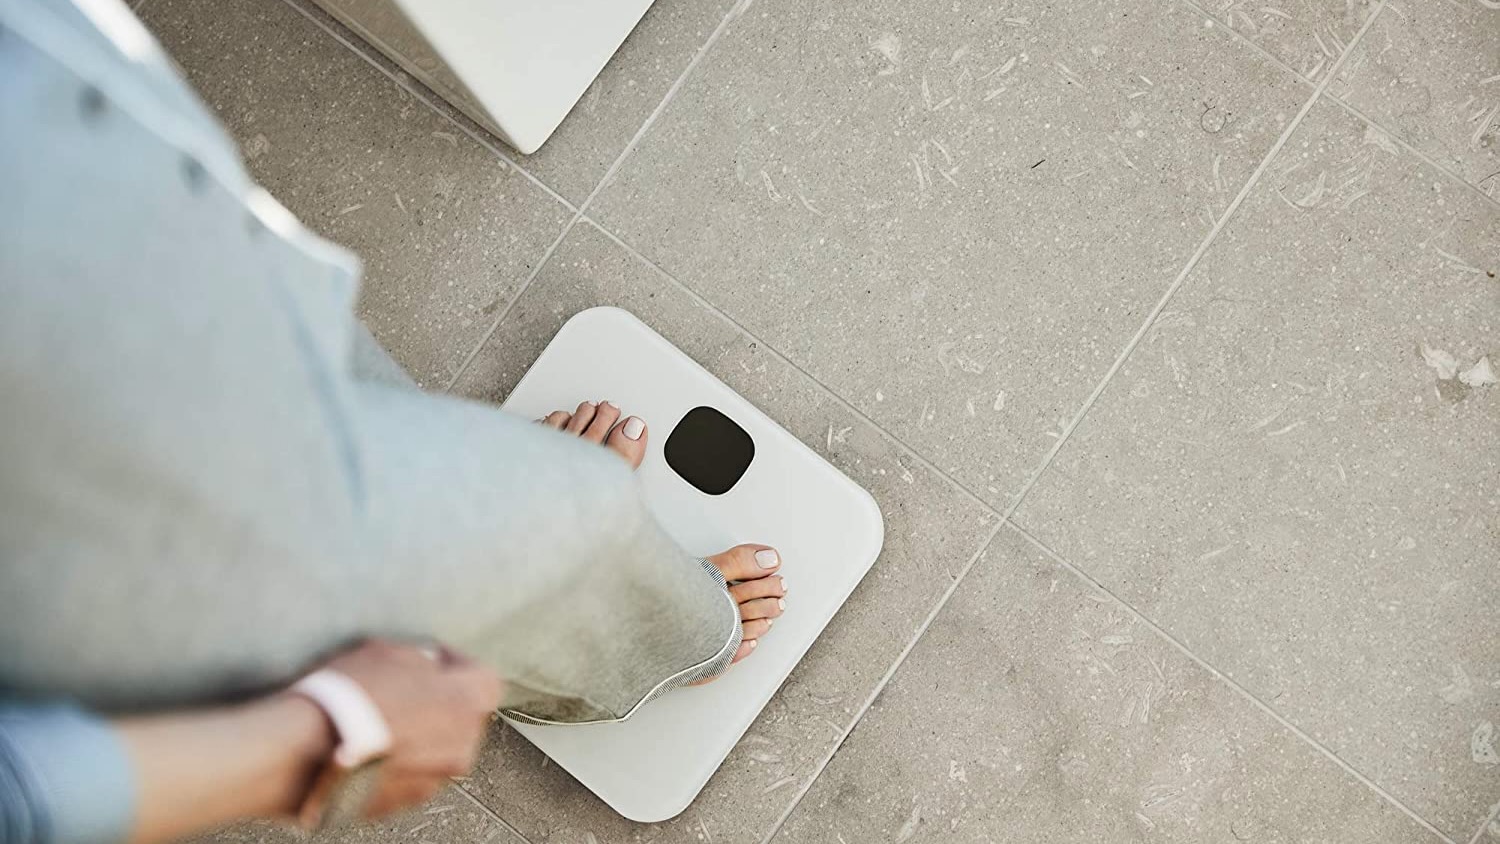 Fitbit Aria Scale: monitor your weight with Fitbit devices